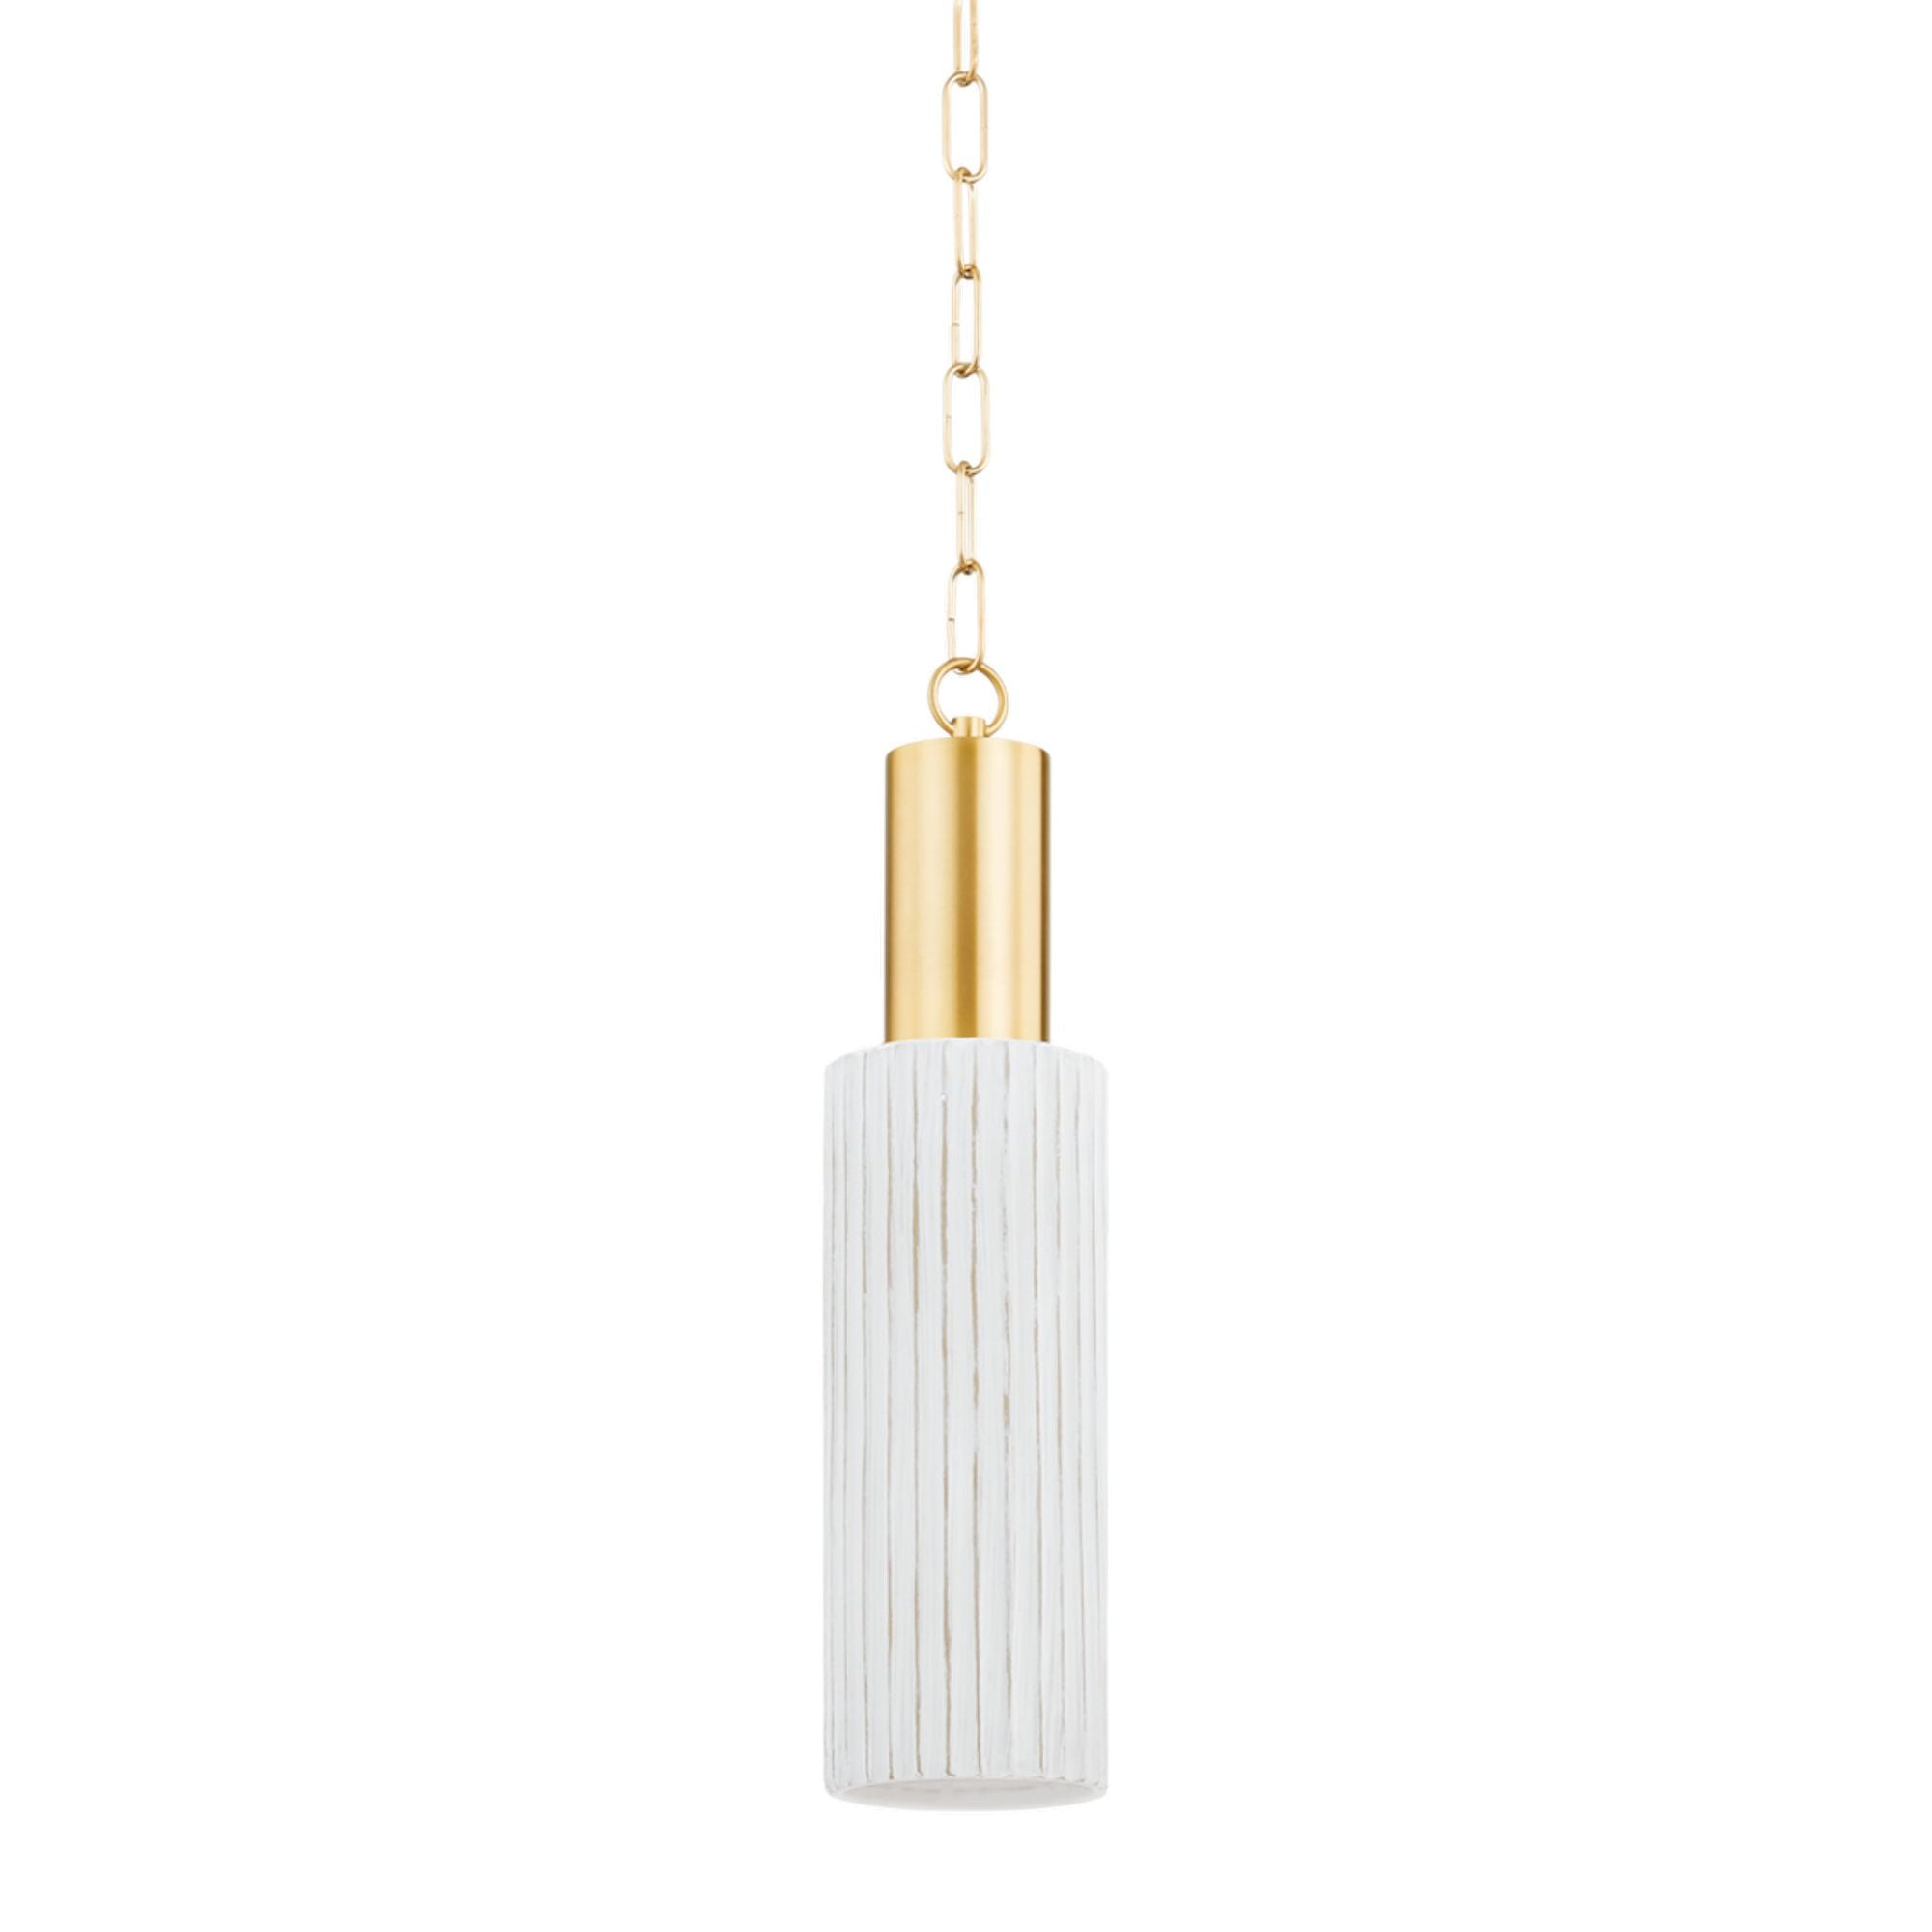 Corissa 1-Light Pendant in Aged Brass/ Ceramic Whitewash Bisque by The Lifestyled Co